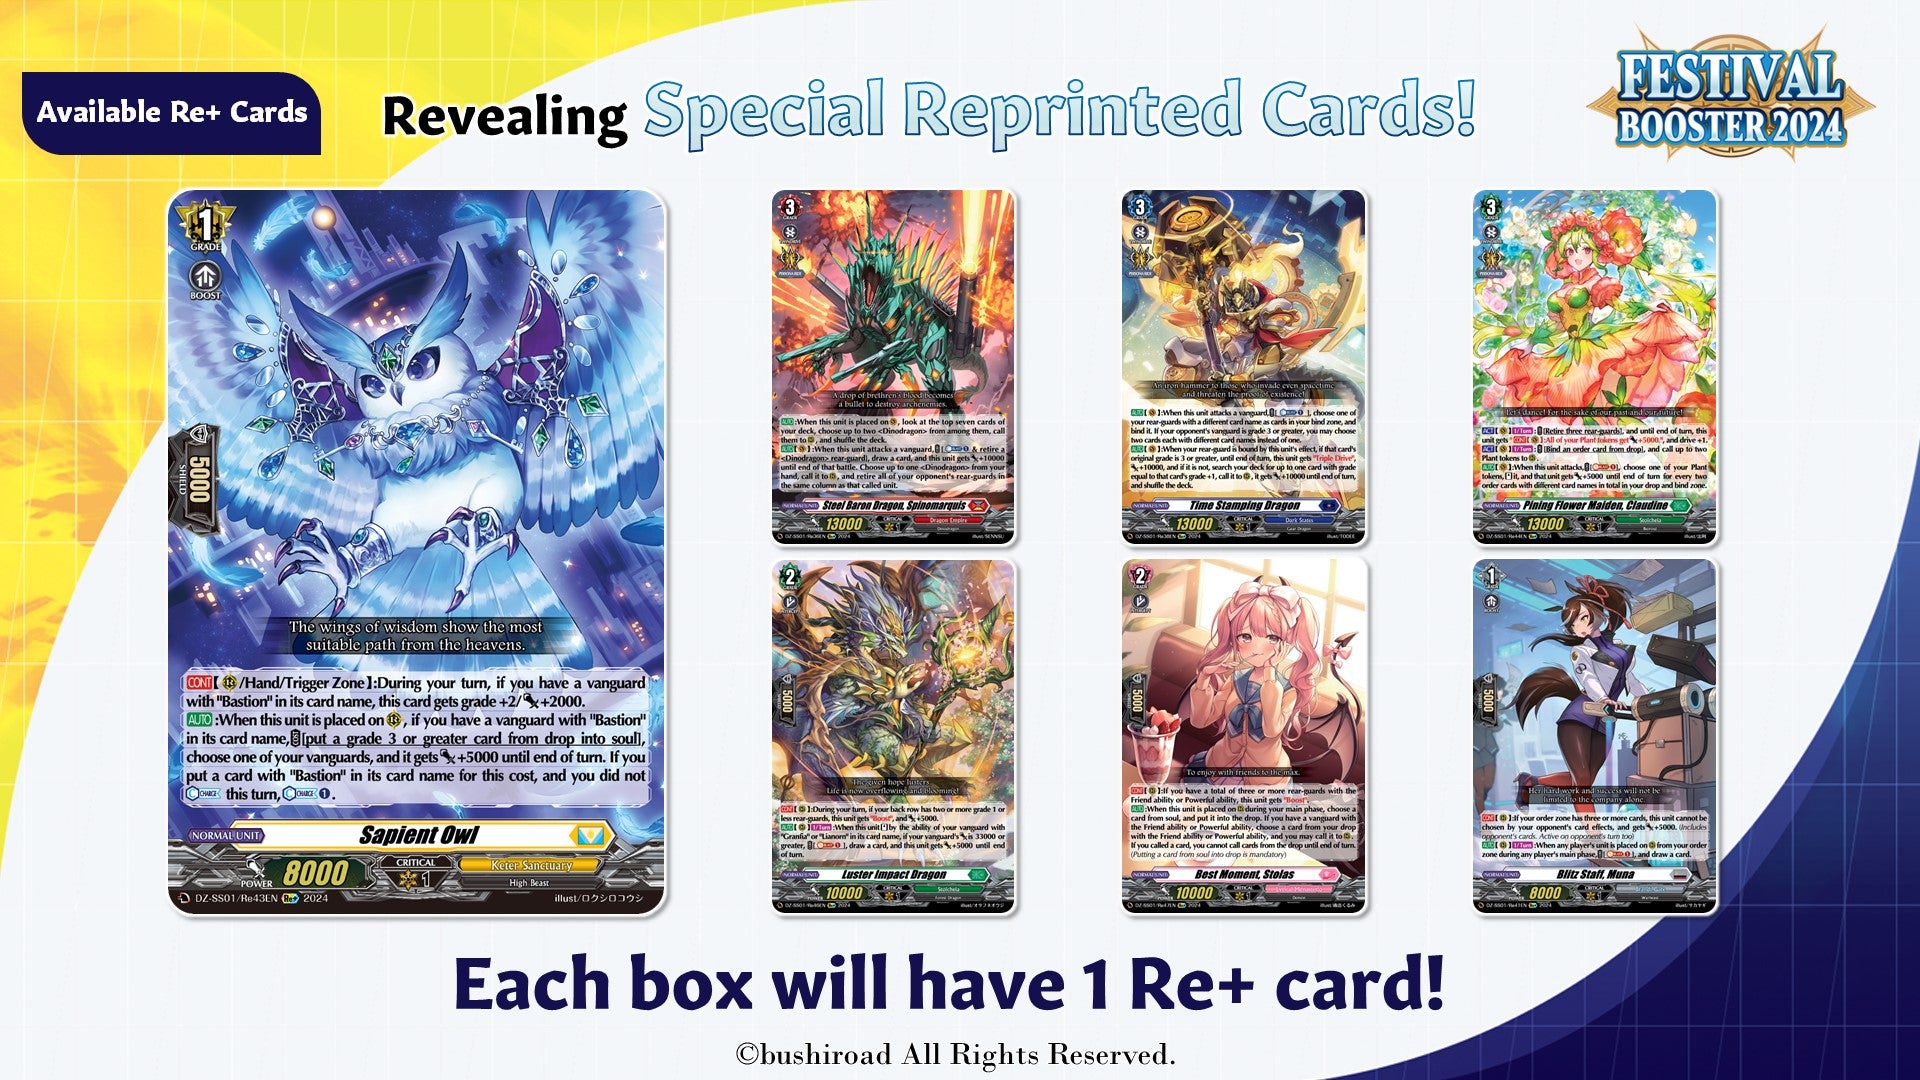 Cardfight!! Vanguard - Special Series: Festival Booster 2024 - Booster Box (10 Packs)